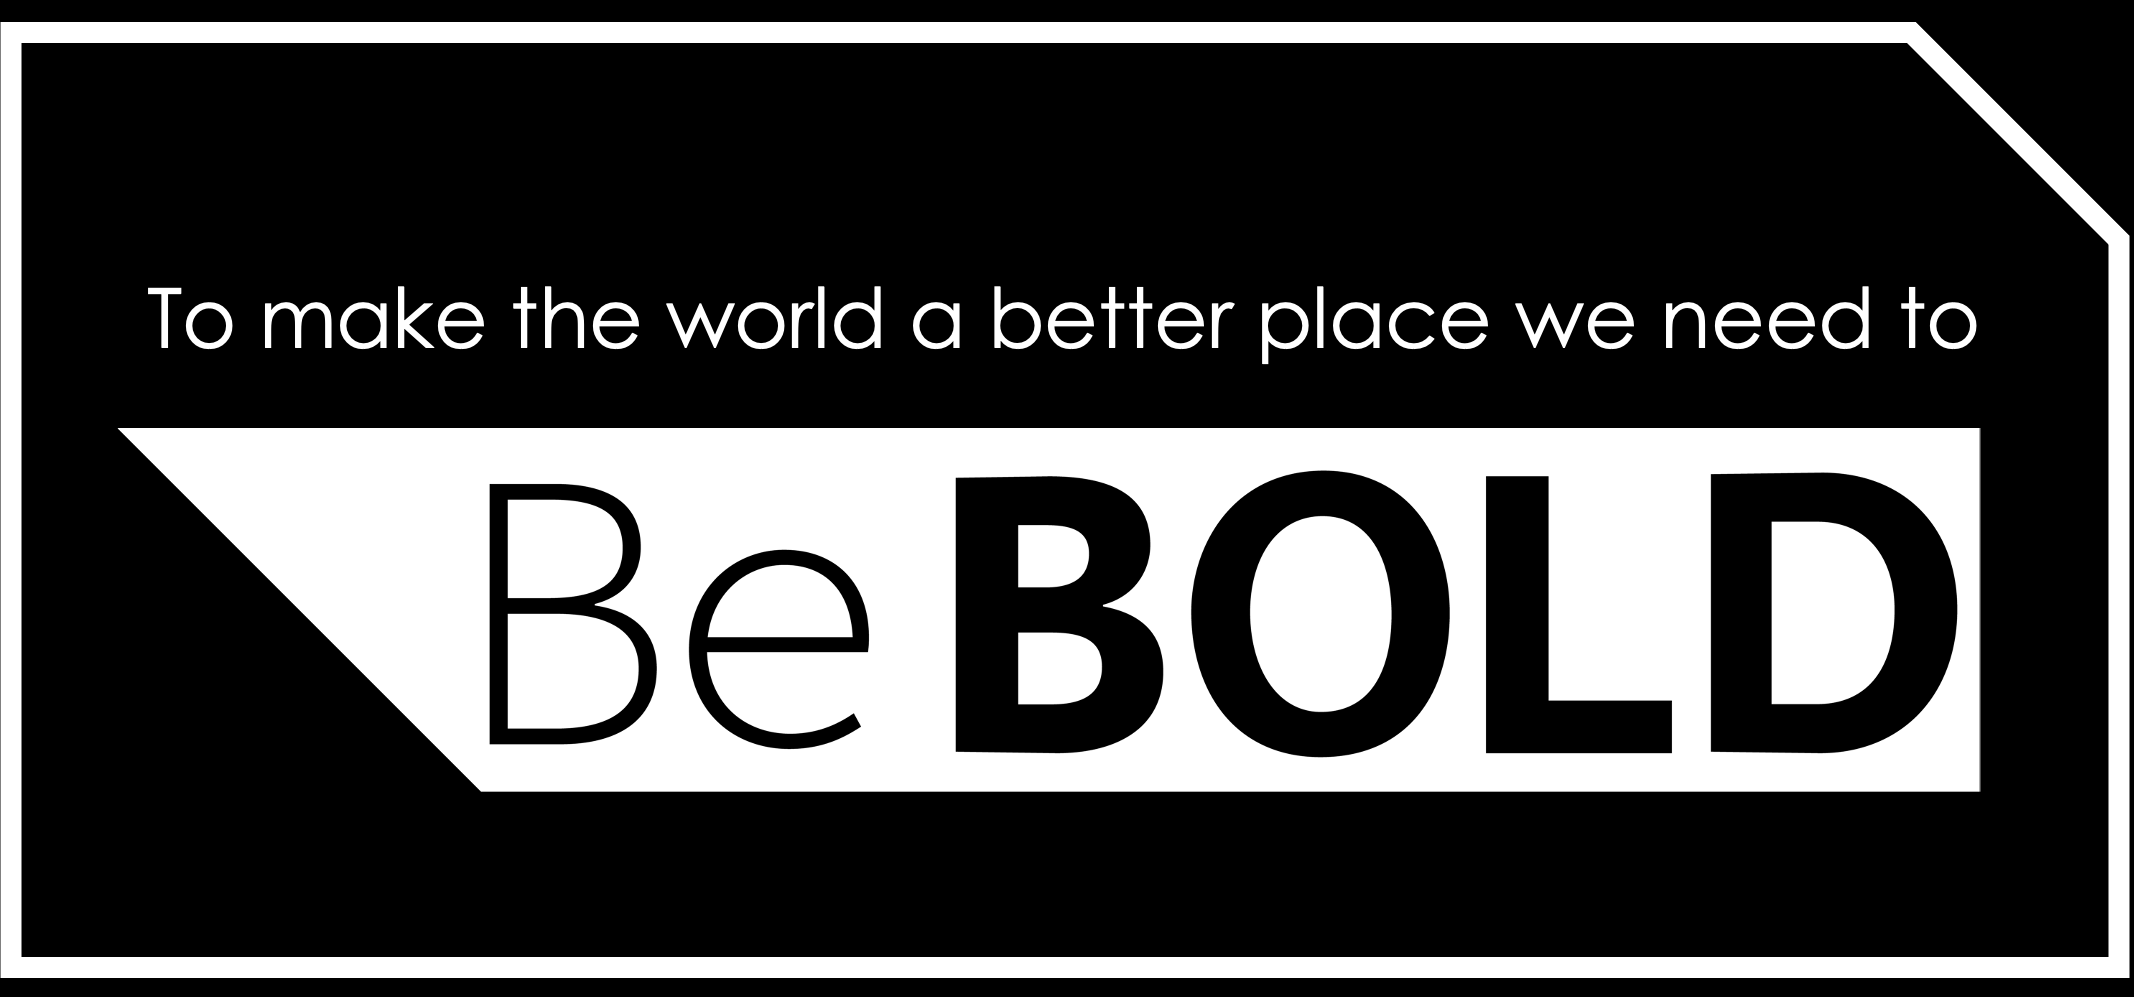 To make the world a better place we need to be bold.